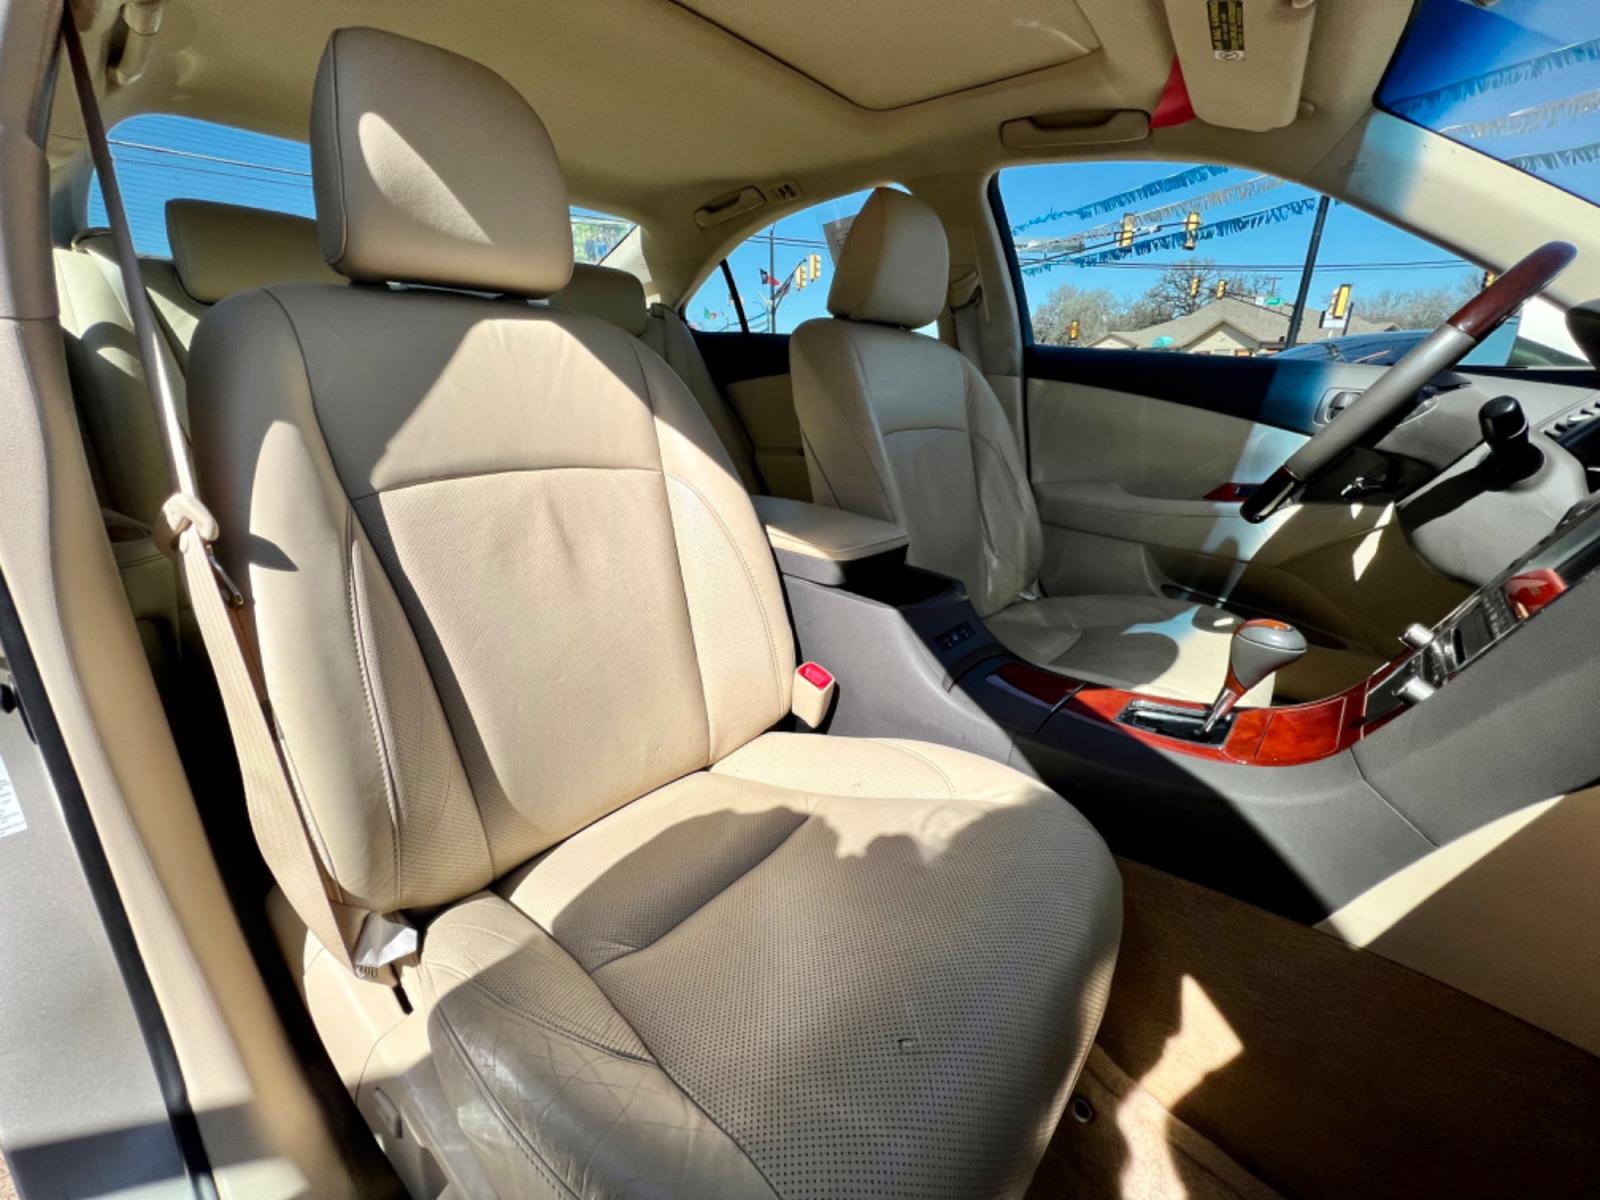 2011 GOLD LEXUS ES 350 (JTHBK1EG9B2) , located at 5900 E. Lancaster Ave., Fort Worth, TX, 76112, (817) 457-5456, 0.000000, 0.000000 - This is a 1 OWNER, 2011 LEXUS ES 350 4 DOOR SEDAN that is in excellent condition. There are no dents or scratches. The interior is clean with no rips or tears or stains. All power windows, door locks and seats. Ice cold AC for those hot Texas summer days. It is equipped with a CD player, AM/FM radio - Photo #15